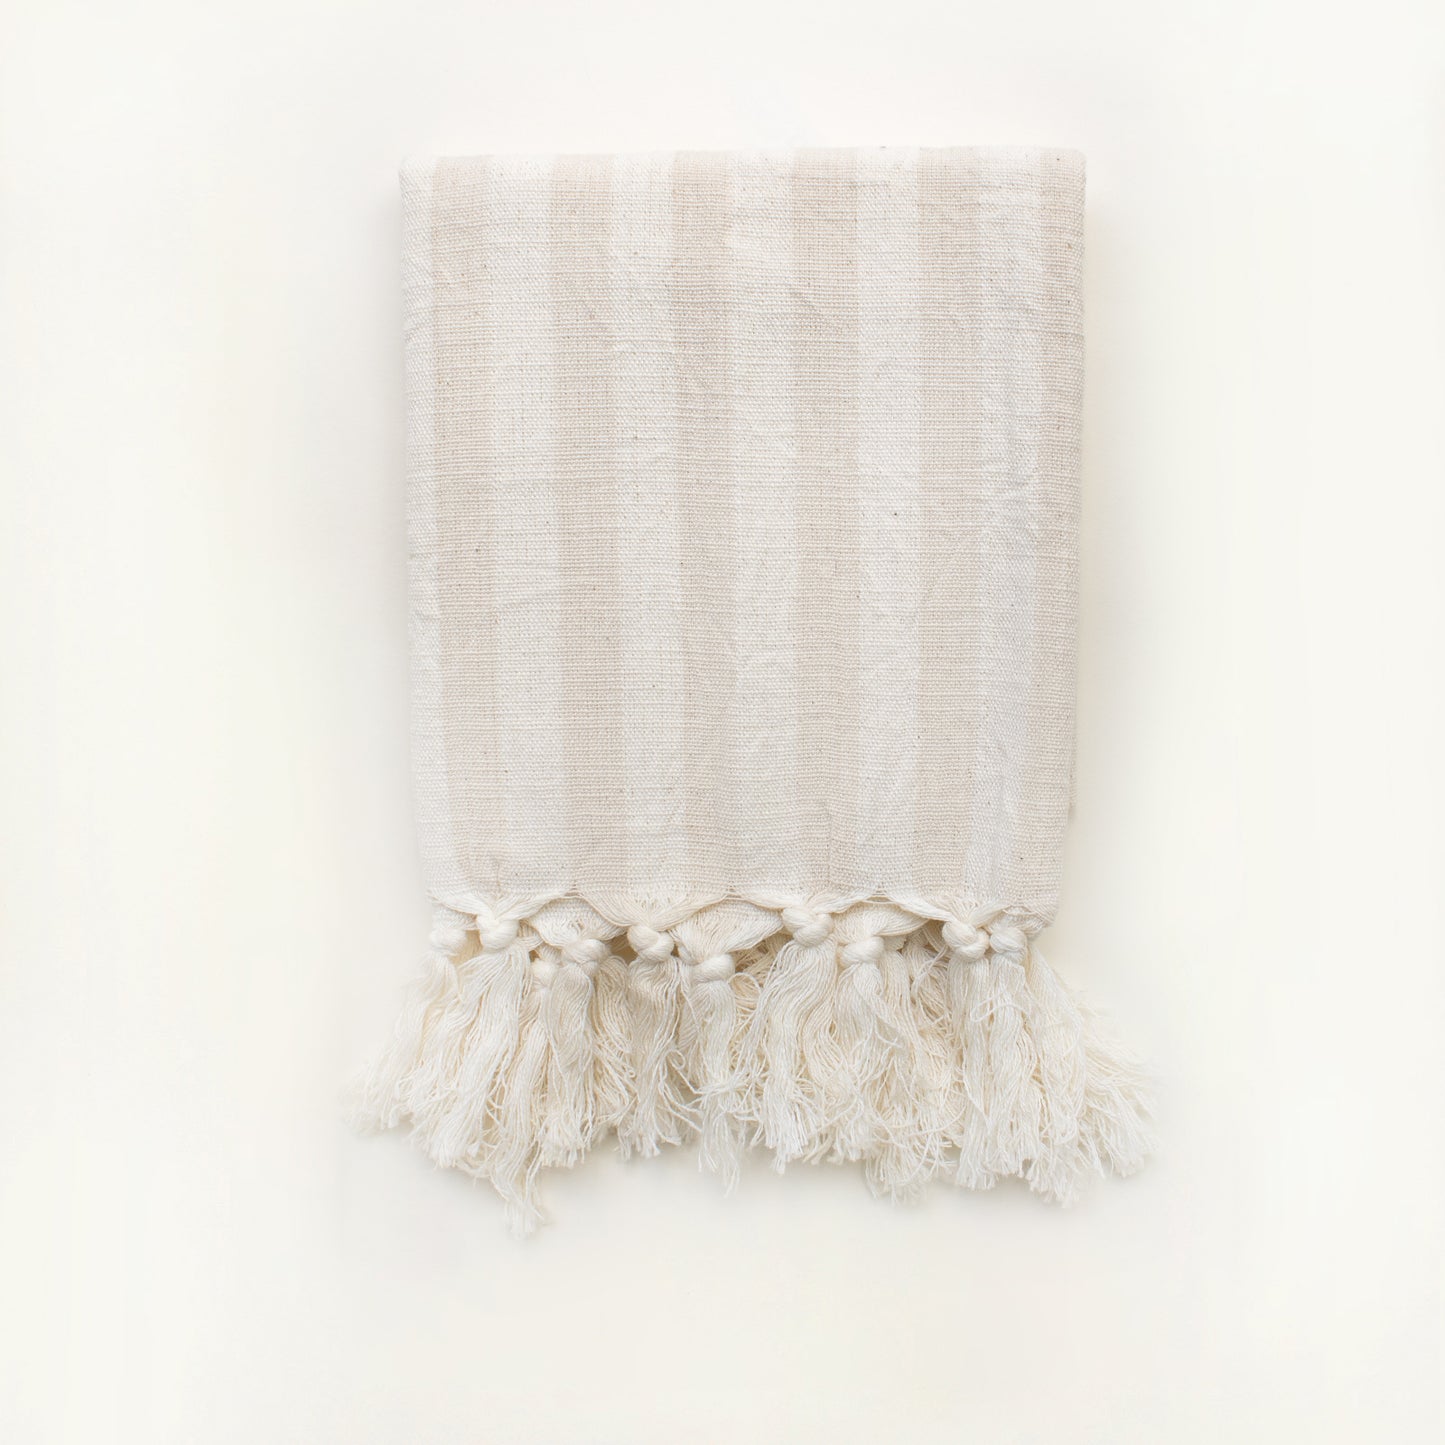 Small Handwoven Hand Towel - White Stripes